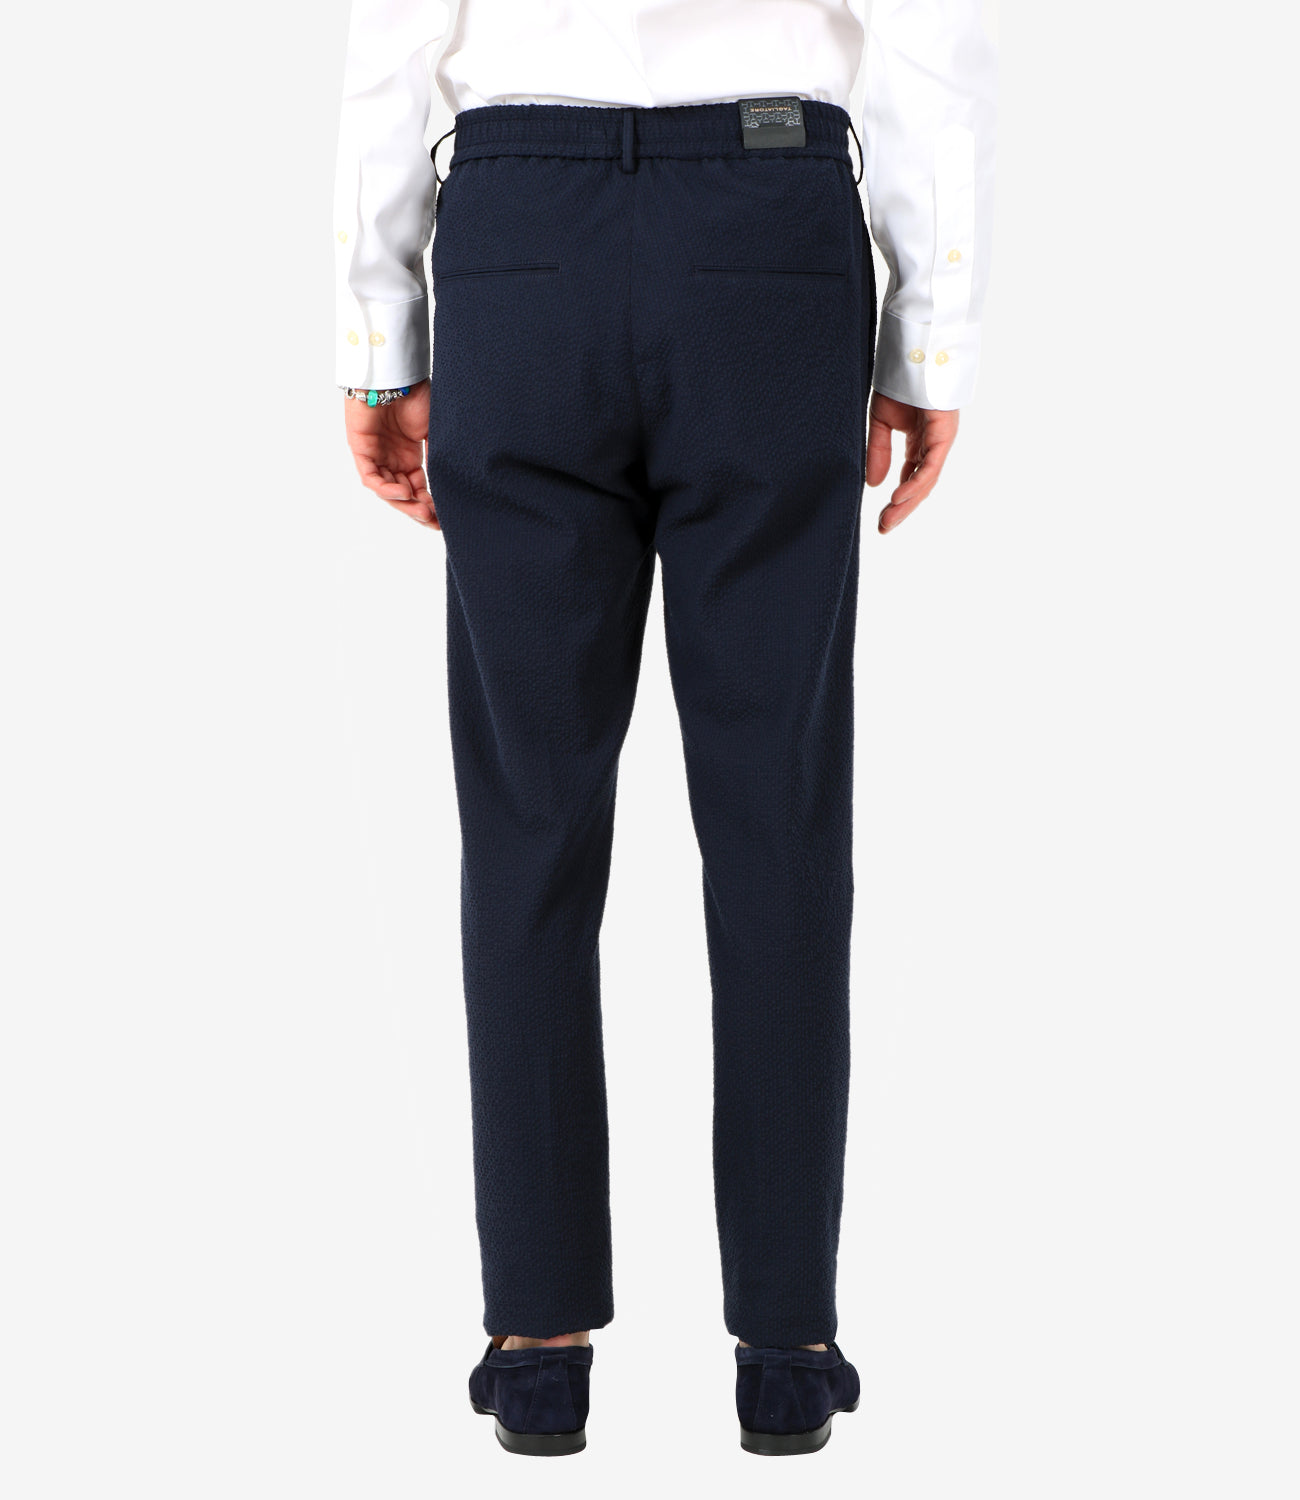 Blue Navy Trousers